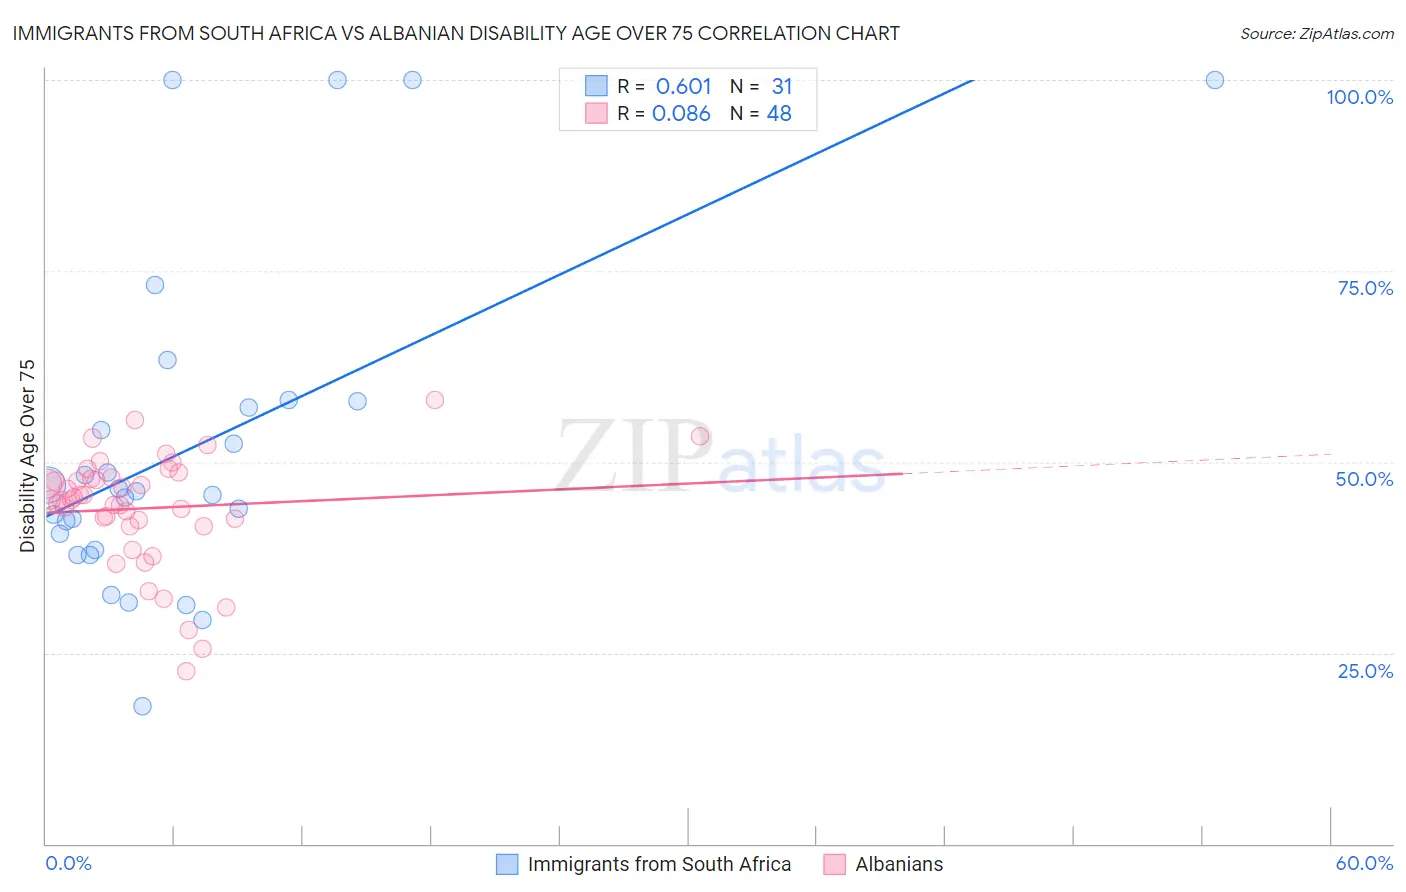 Immigrants from South Africa vs Albanian Disability Age Over 75